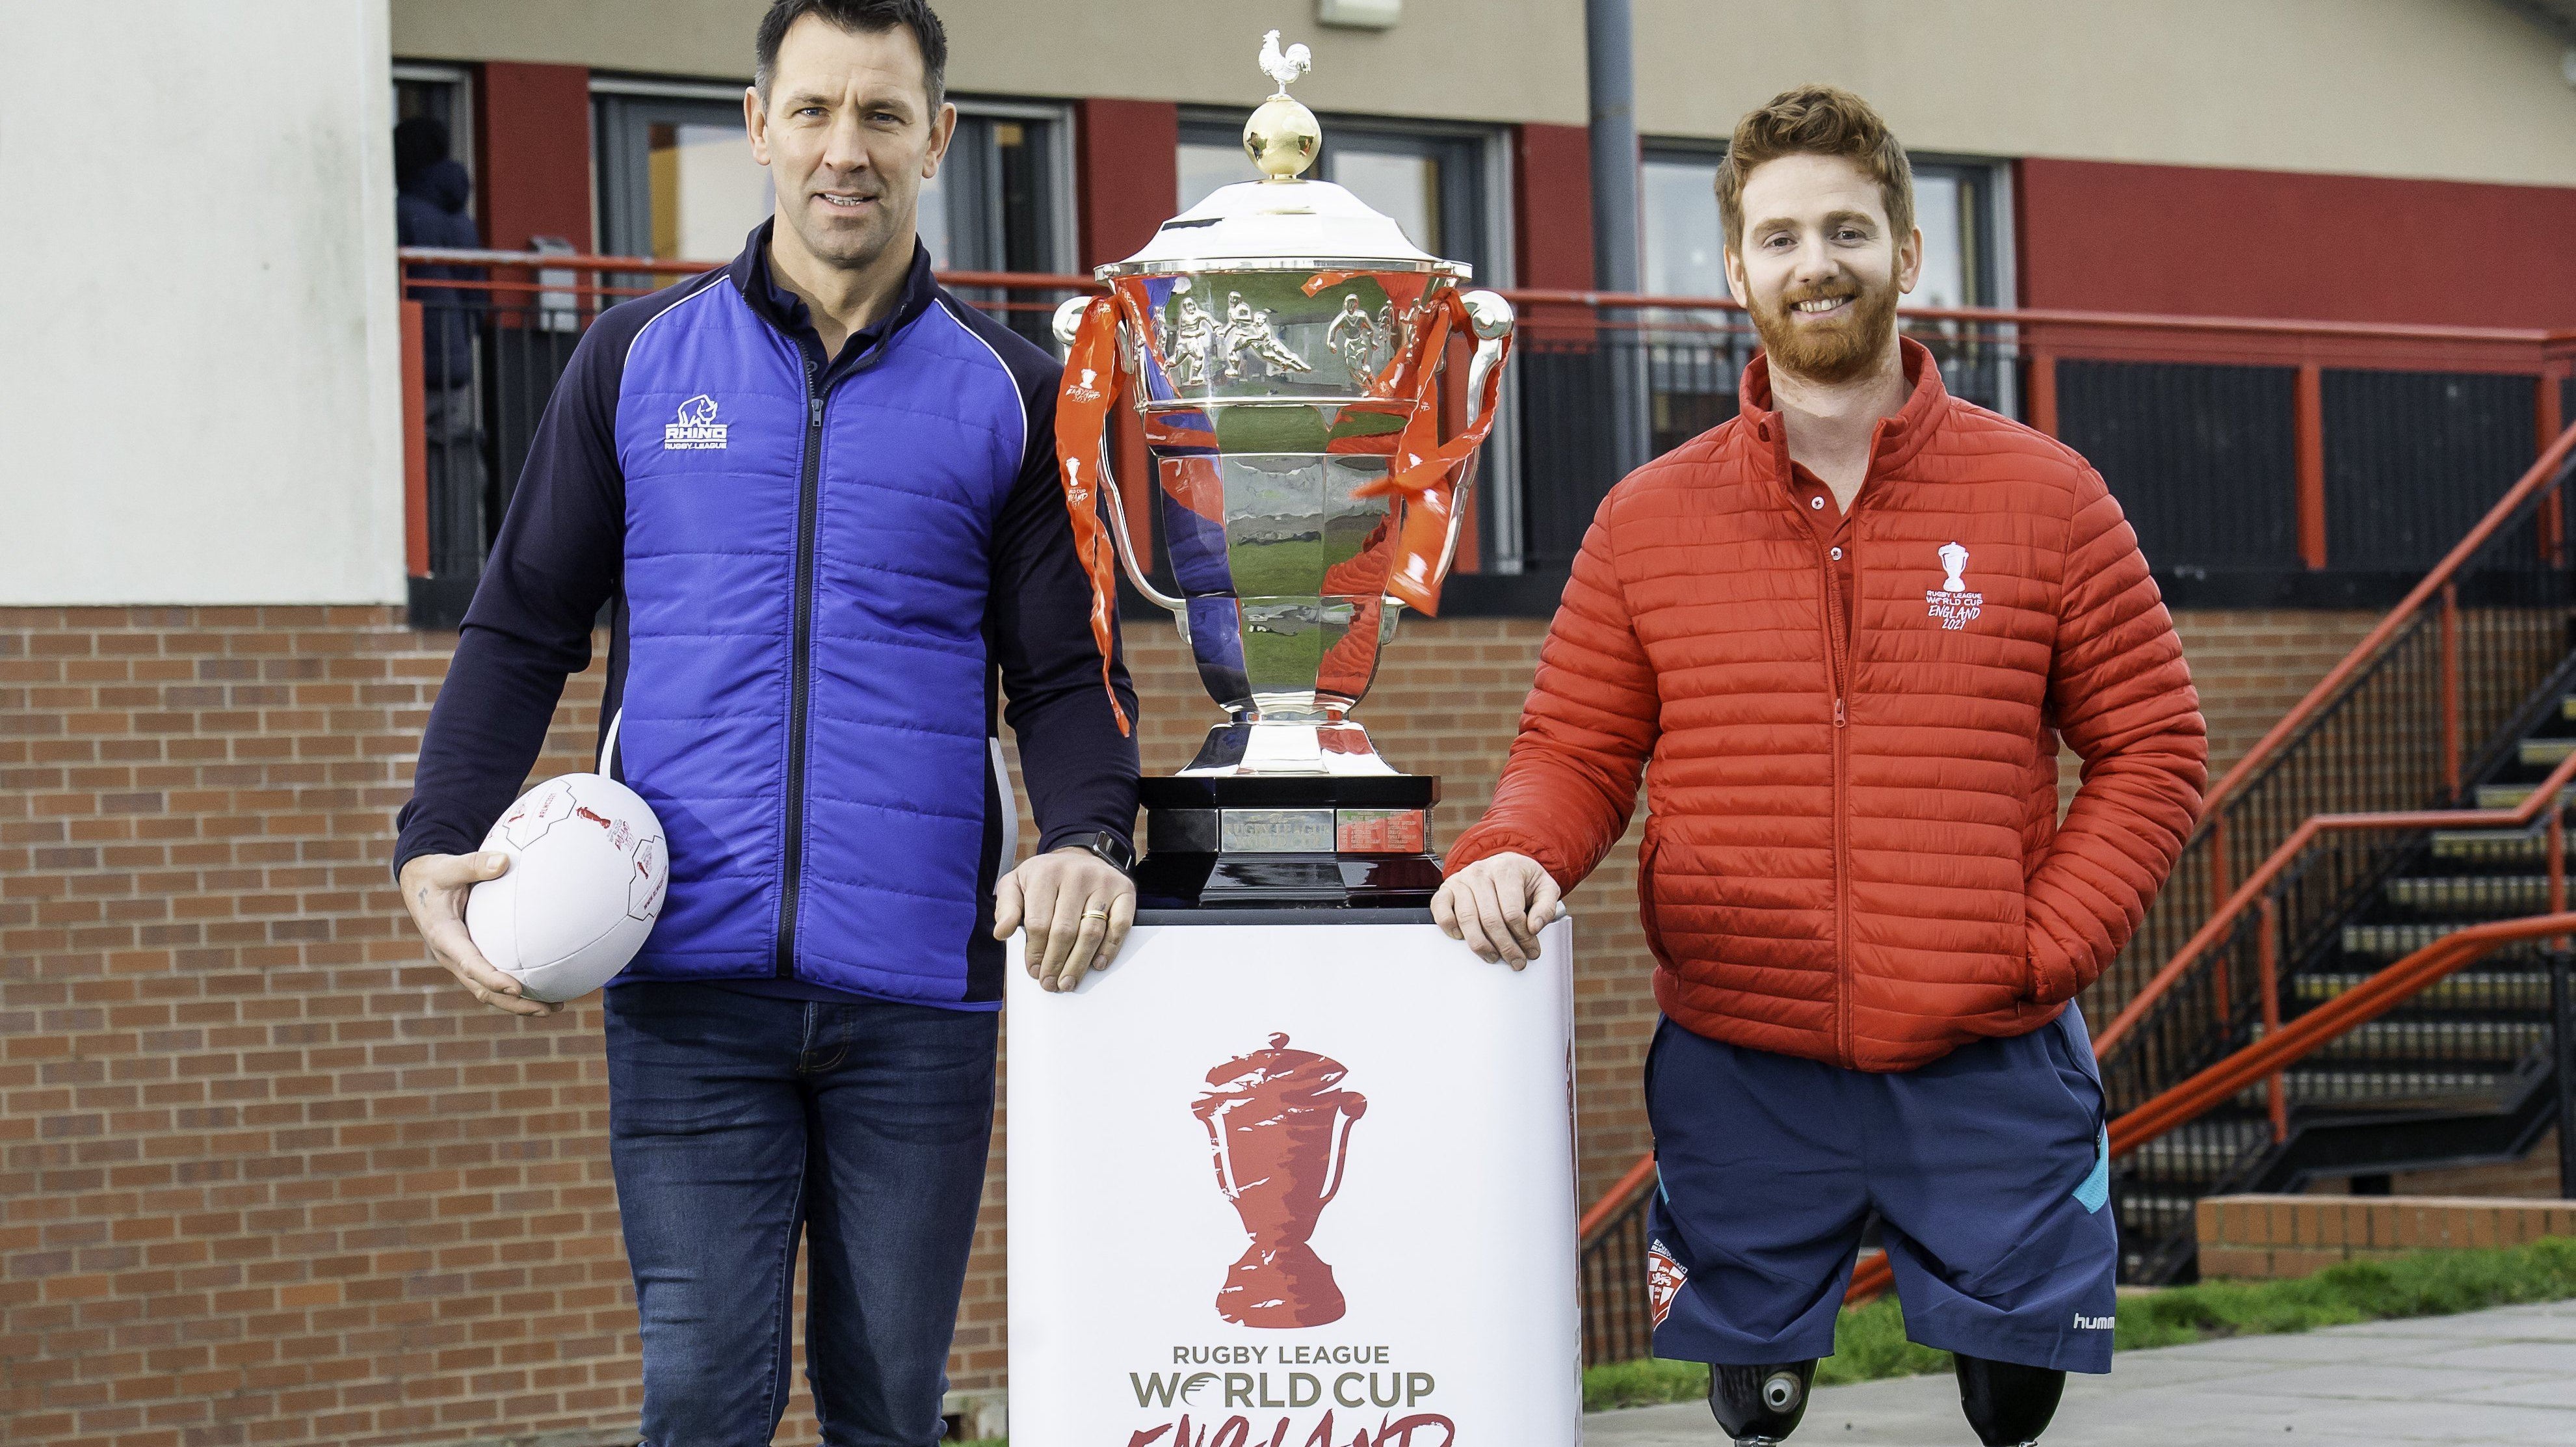 RHINO SIGNS UP FOR RUGBY LEAGUE WORLD CUP 2021 [RLWC2021] INSPIRATIONALL PROGRAMME